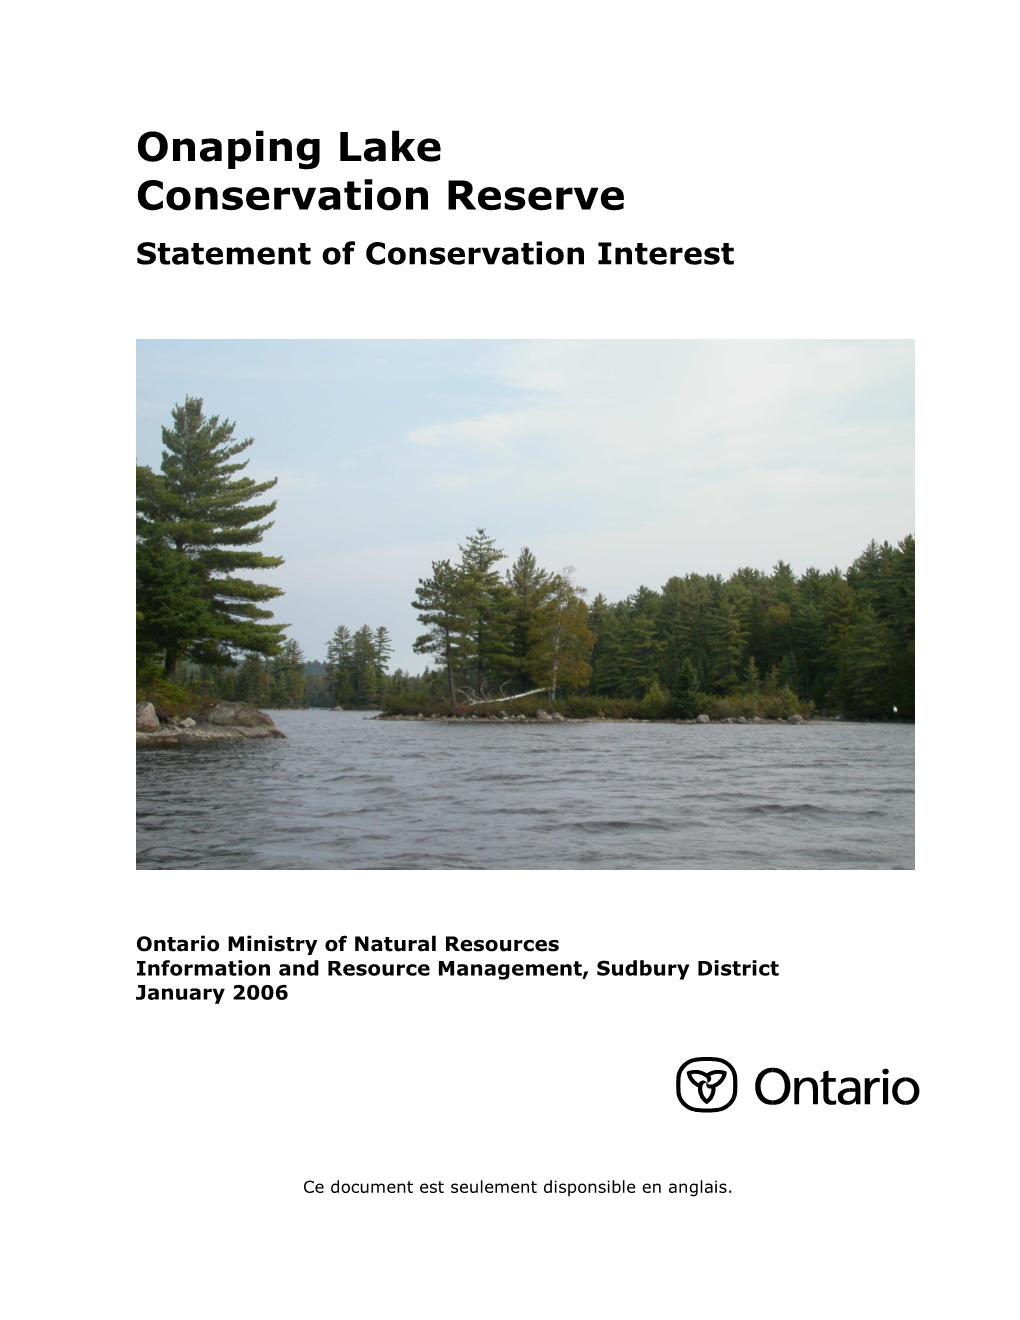 Onaping Lake Conservation Reserve